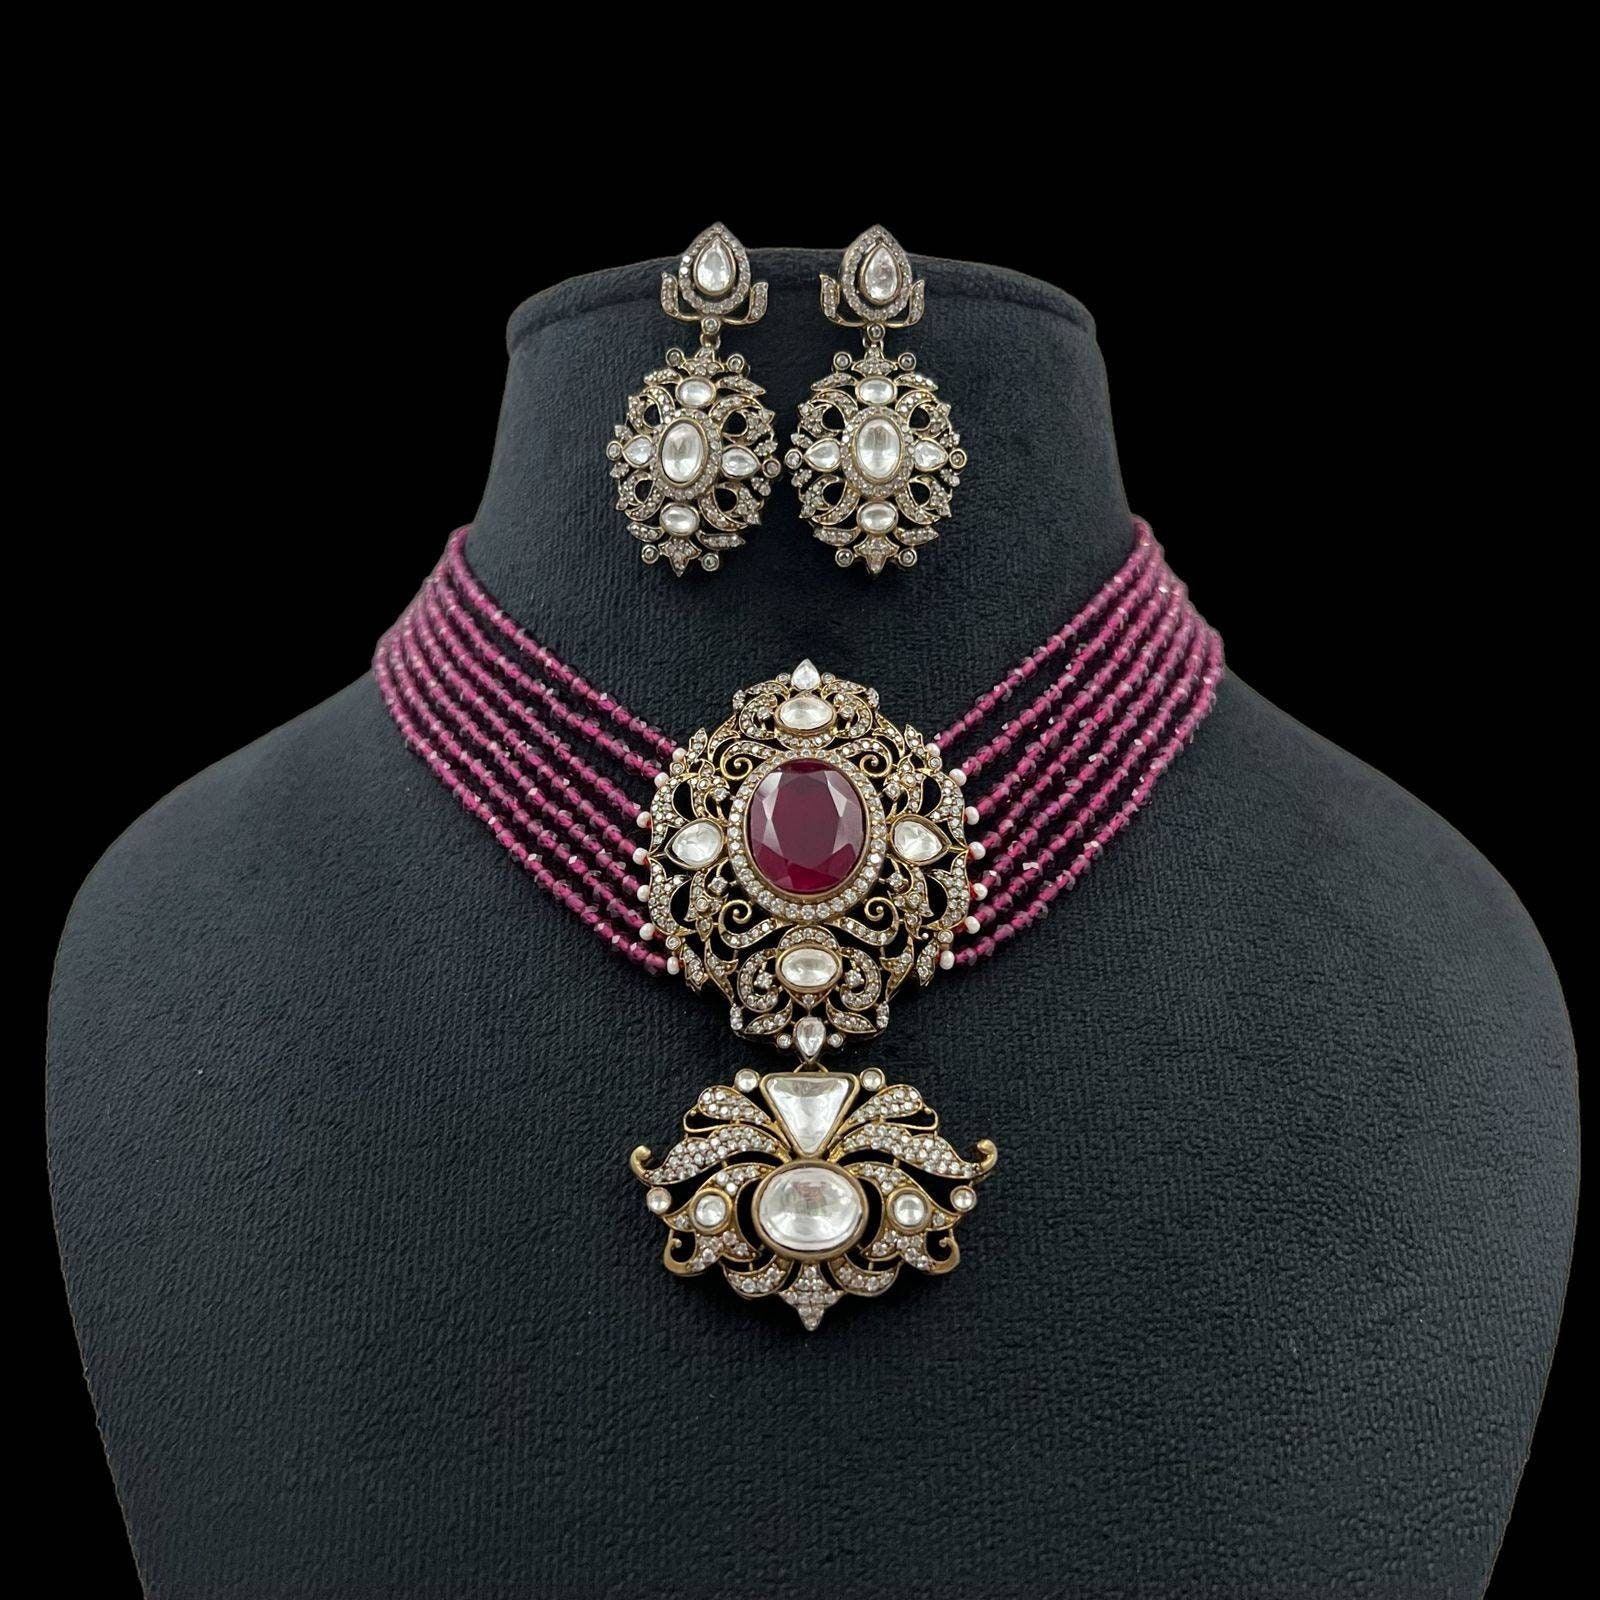 Antique Victorian Jewellery | vlr.eng.br